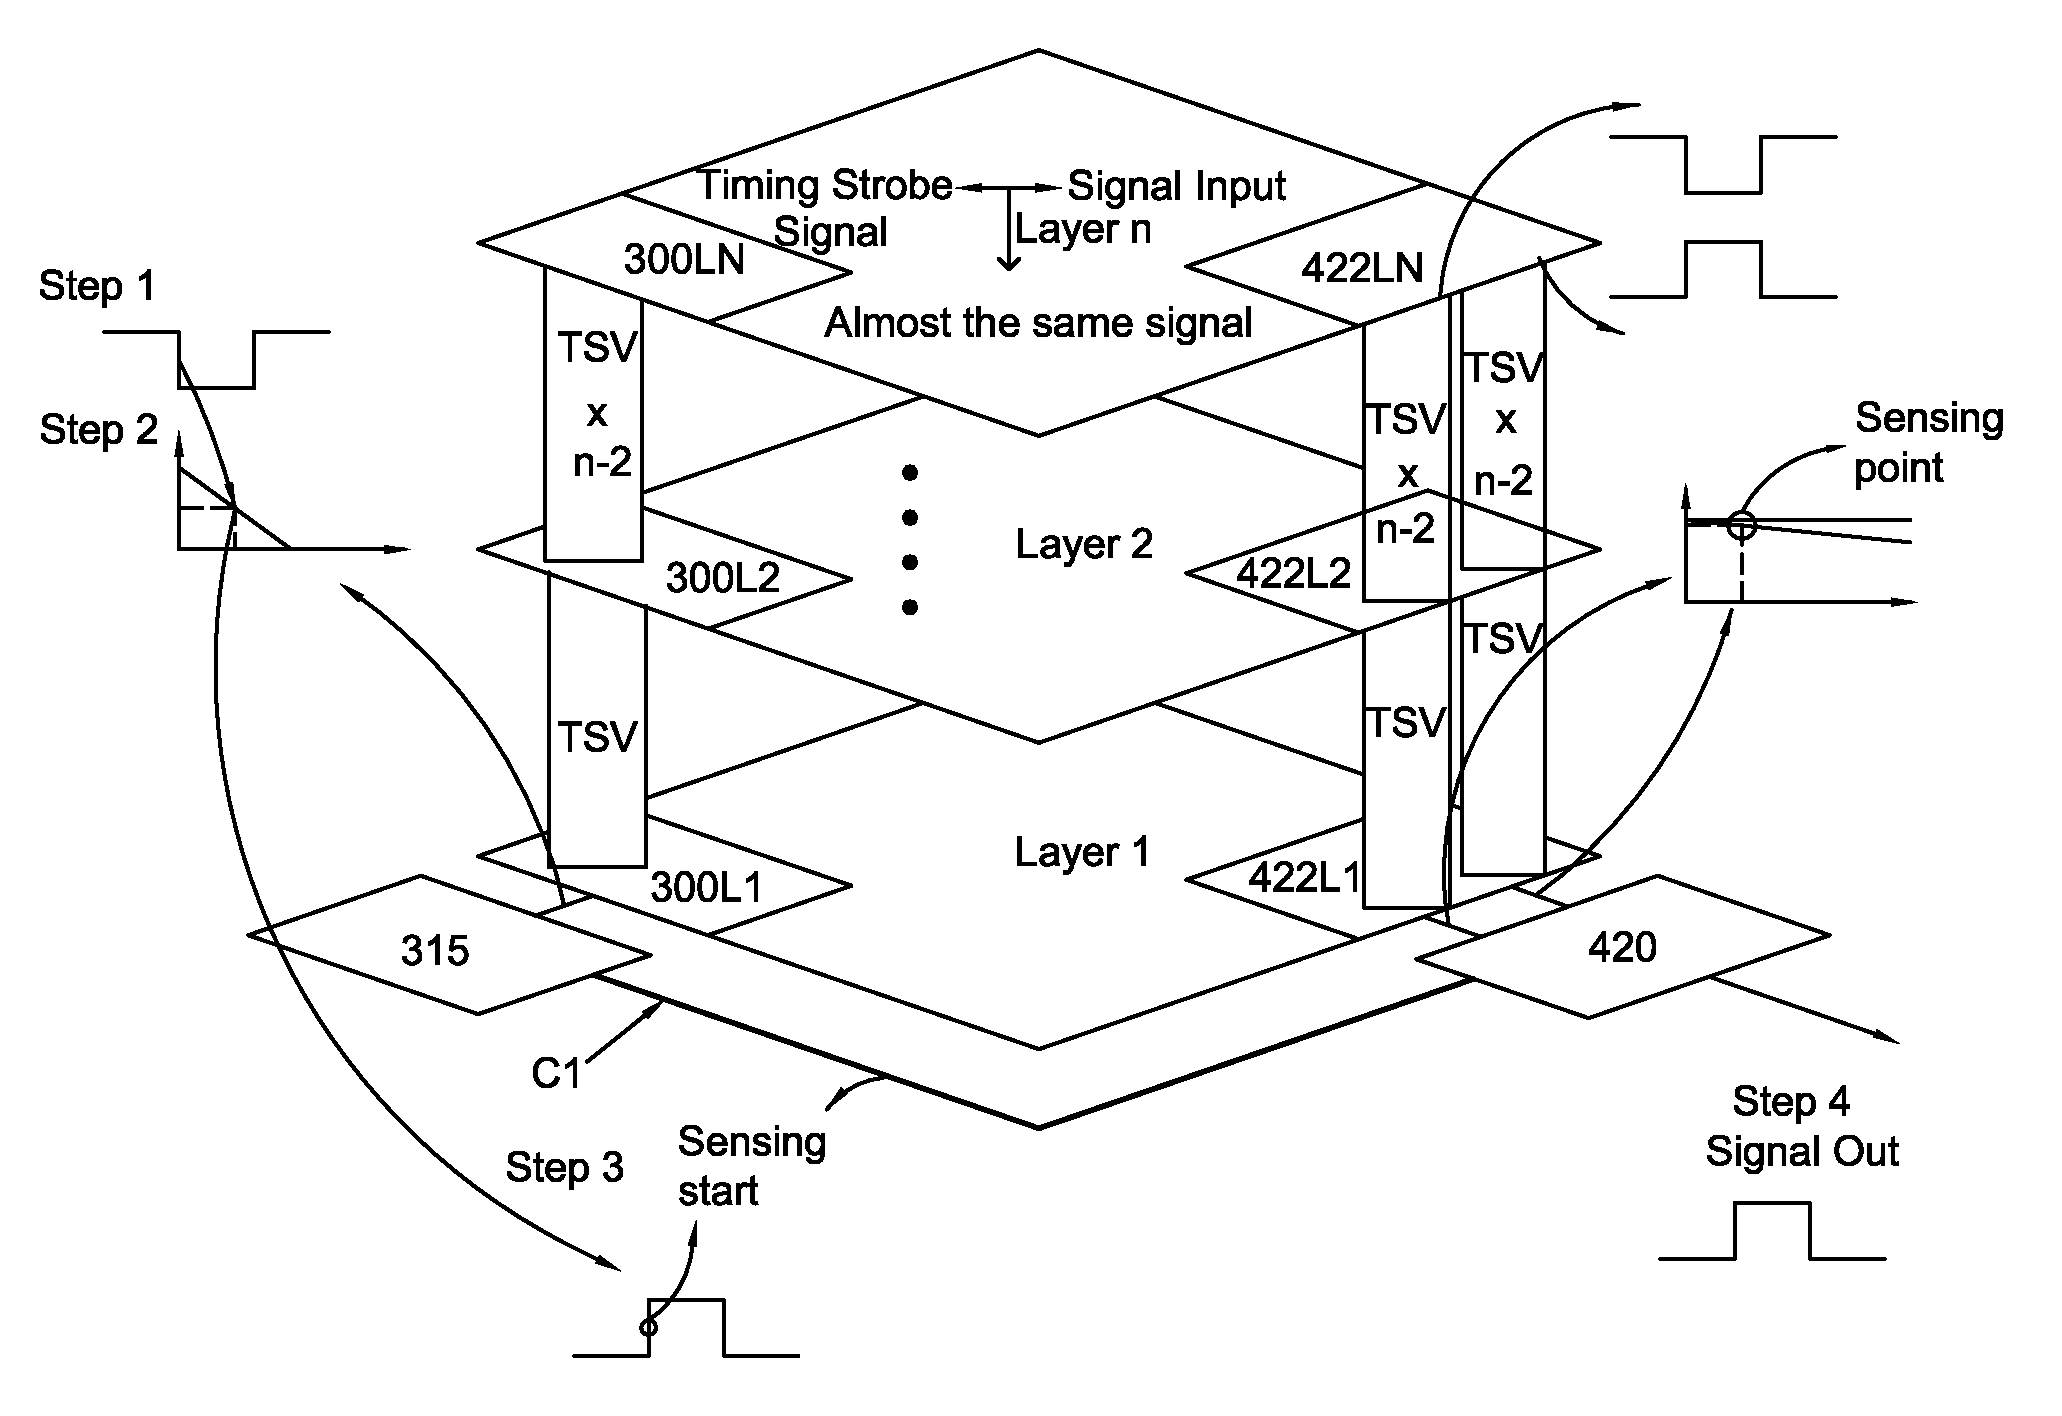 Differential sensing and TSV timing control scheme for 3D-IC